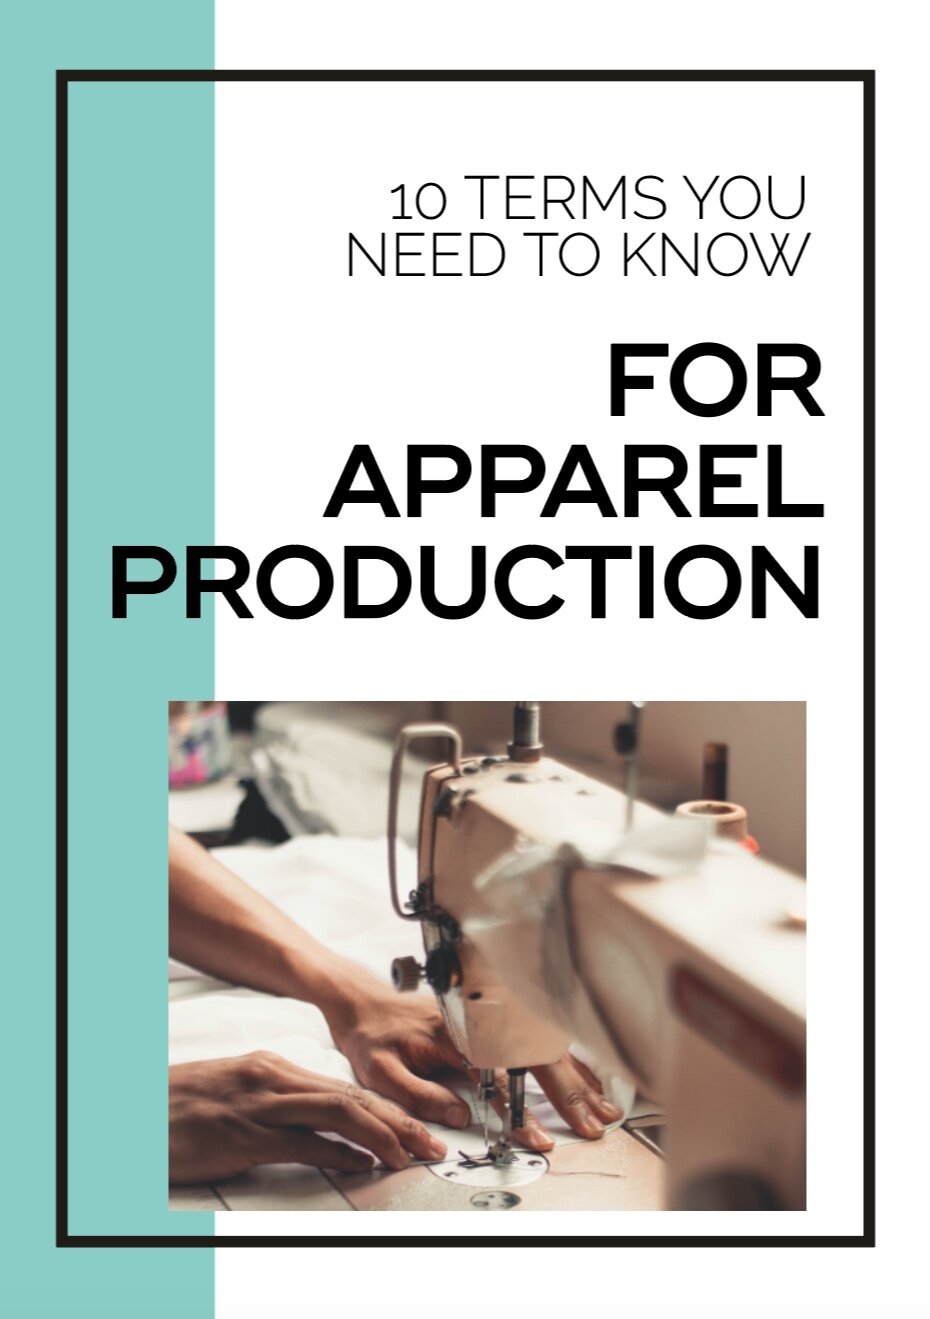 Apparel+maunfacture+terms+you+need+to+know+4.jpg